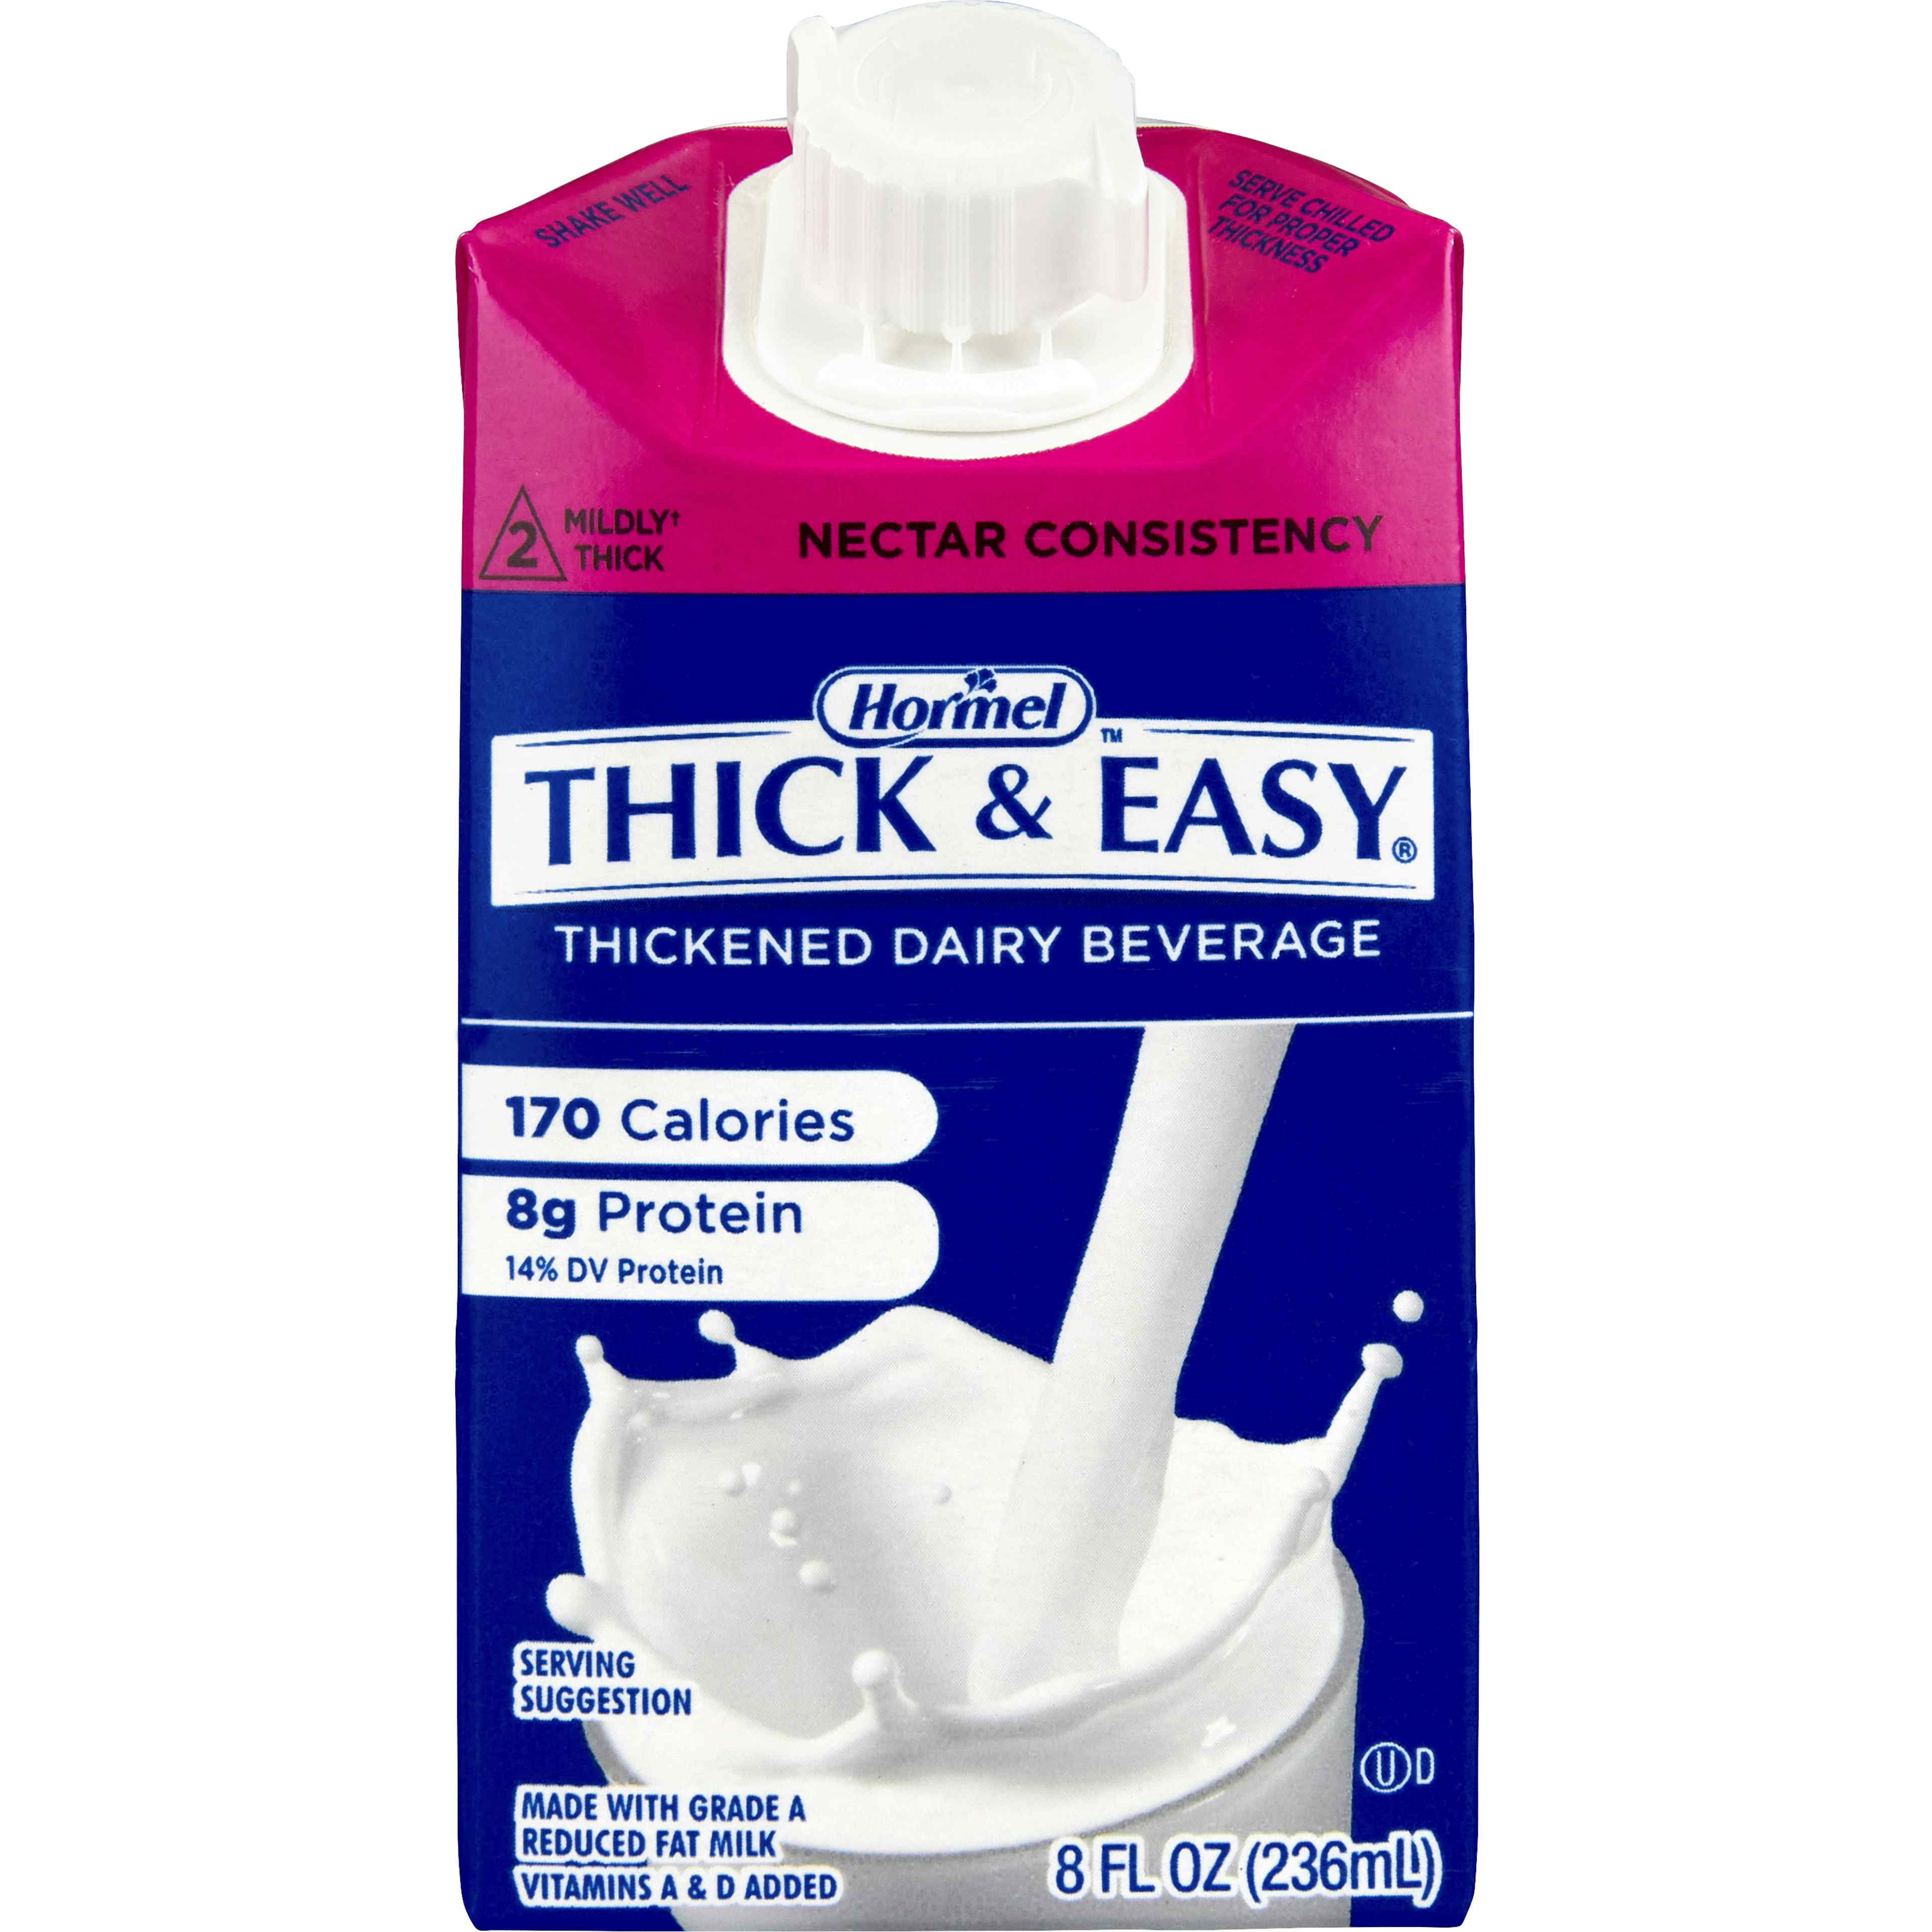 Hormel Thick & Easy Thickened Dairy Beverage, Nectar Consistency, Mildly Thick